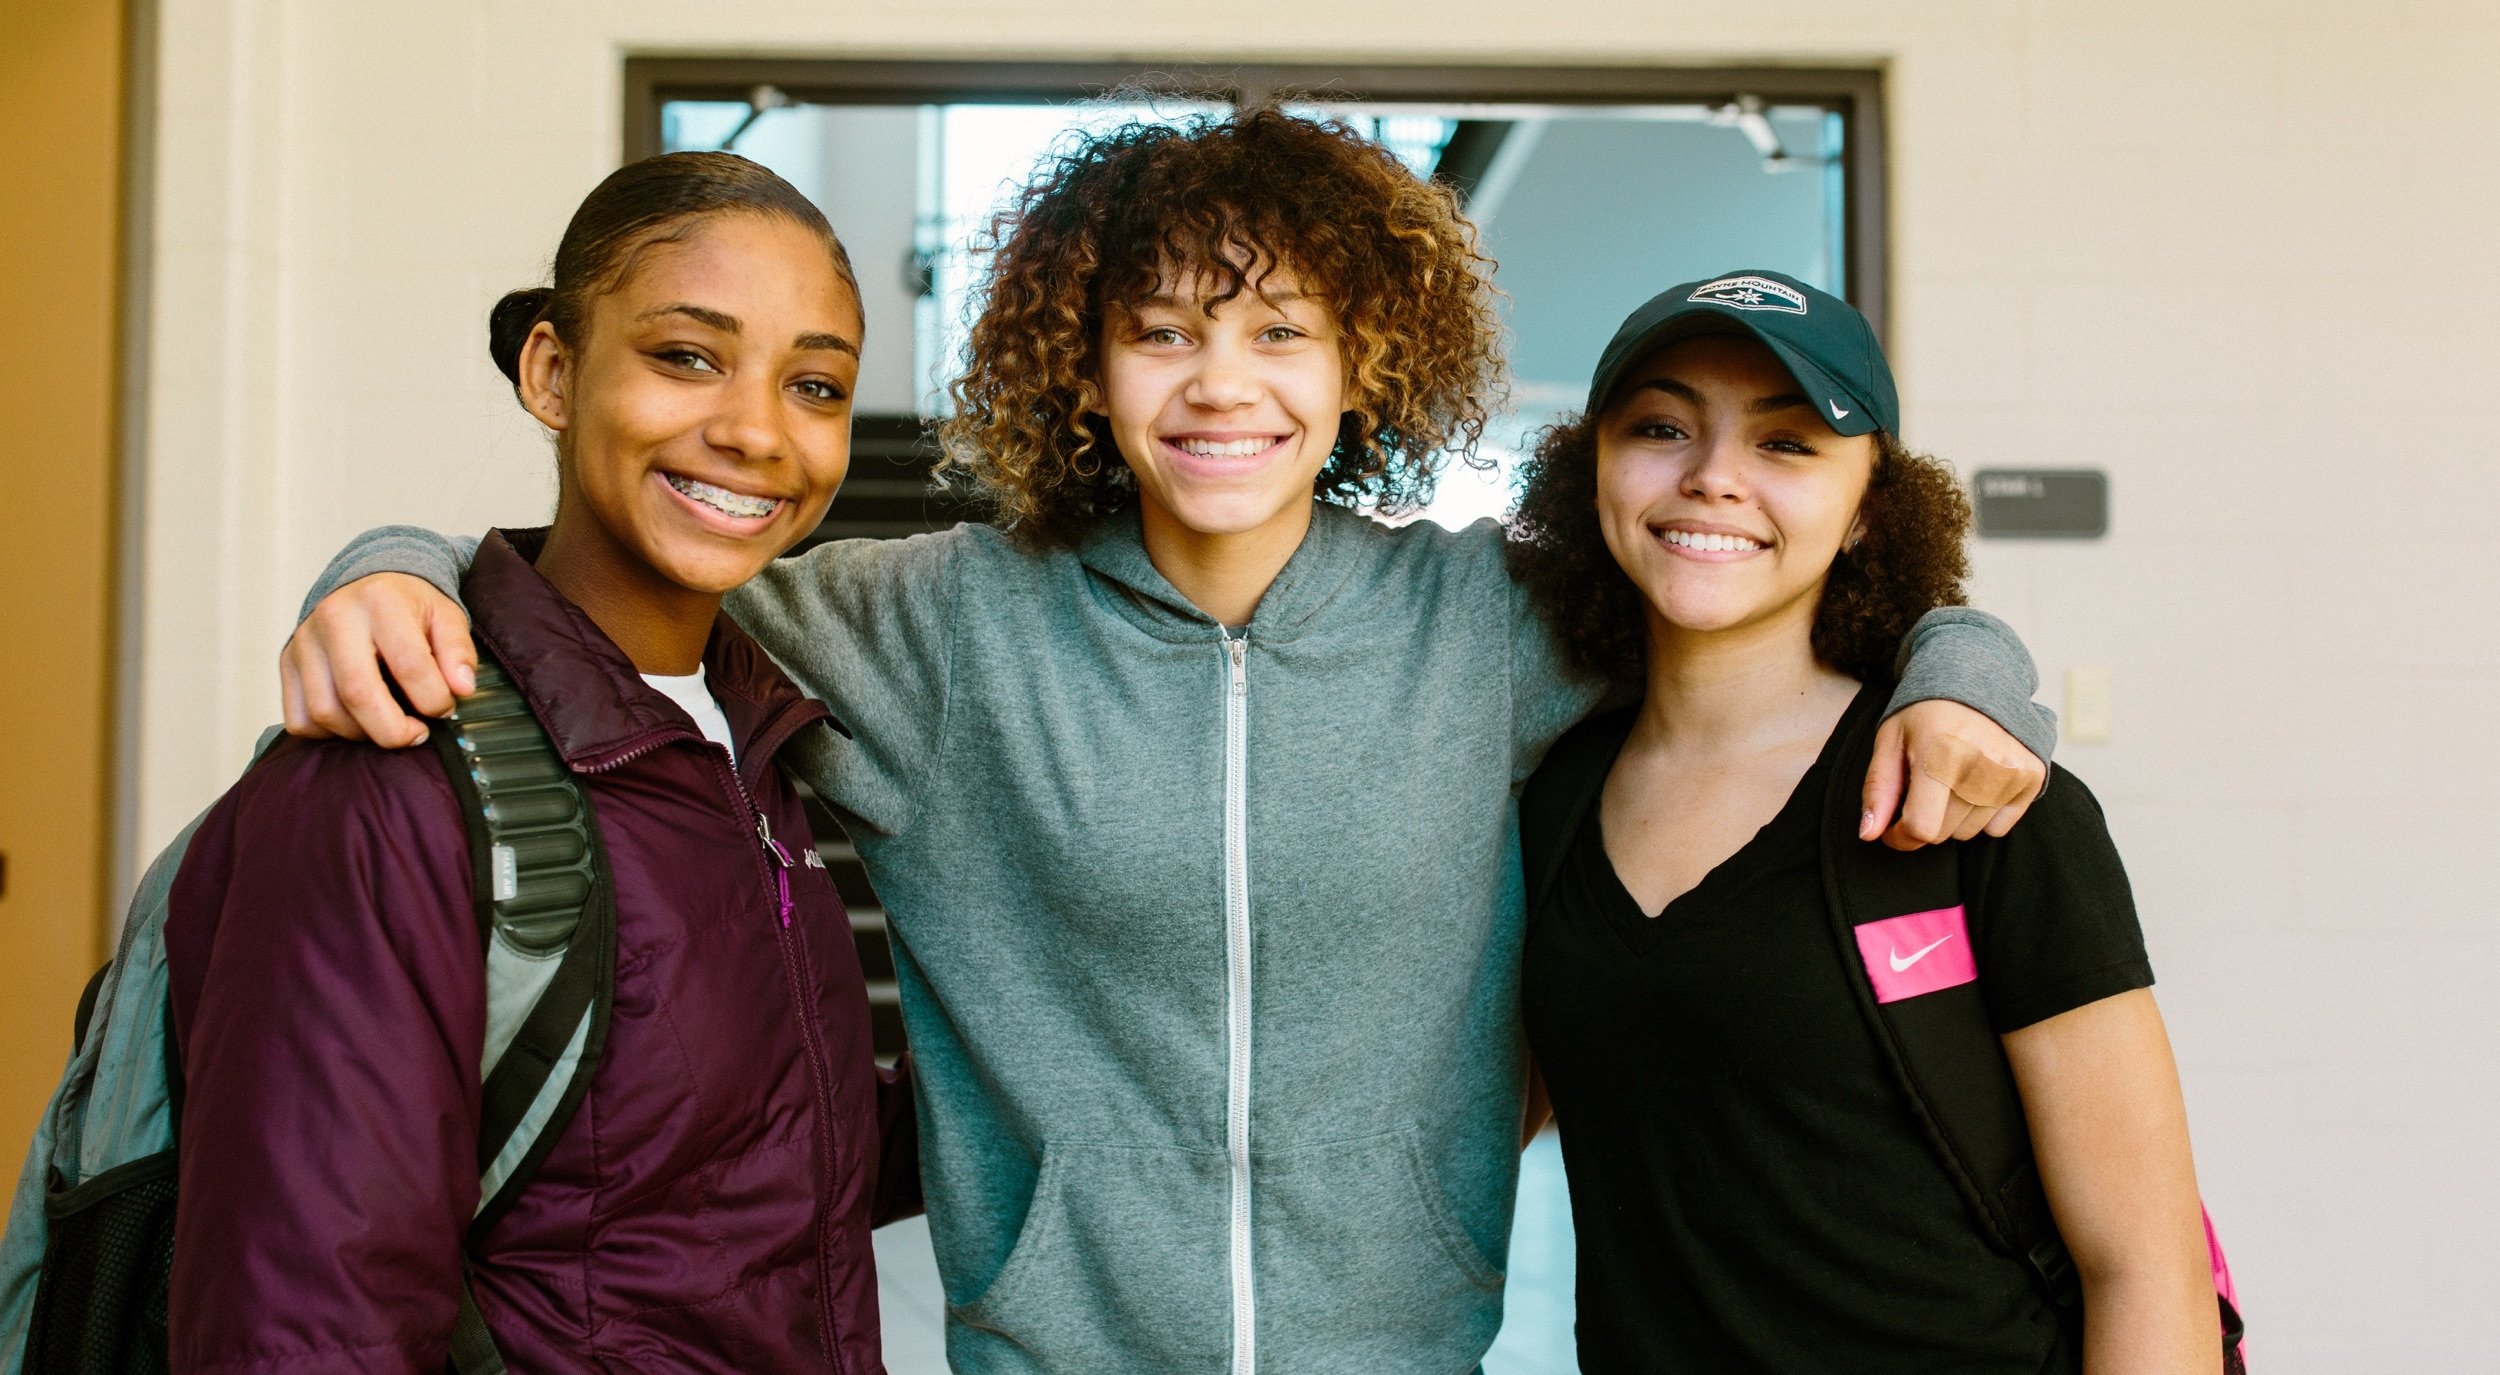 Three students stand together smiling